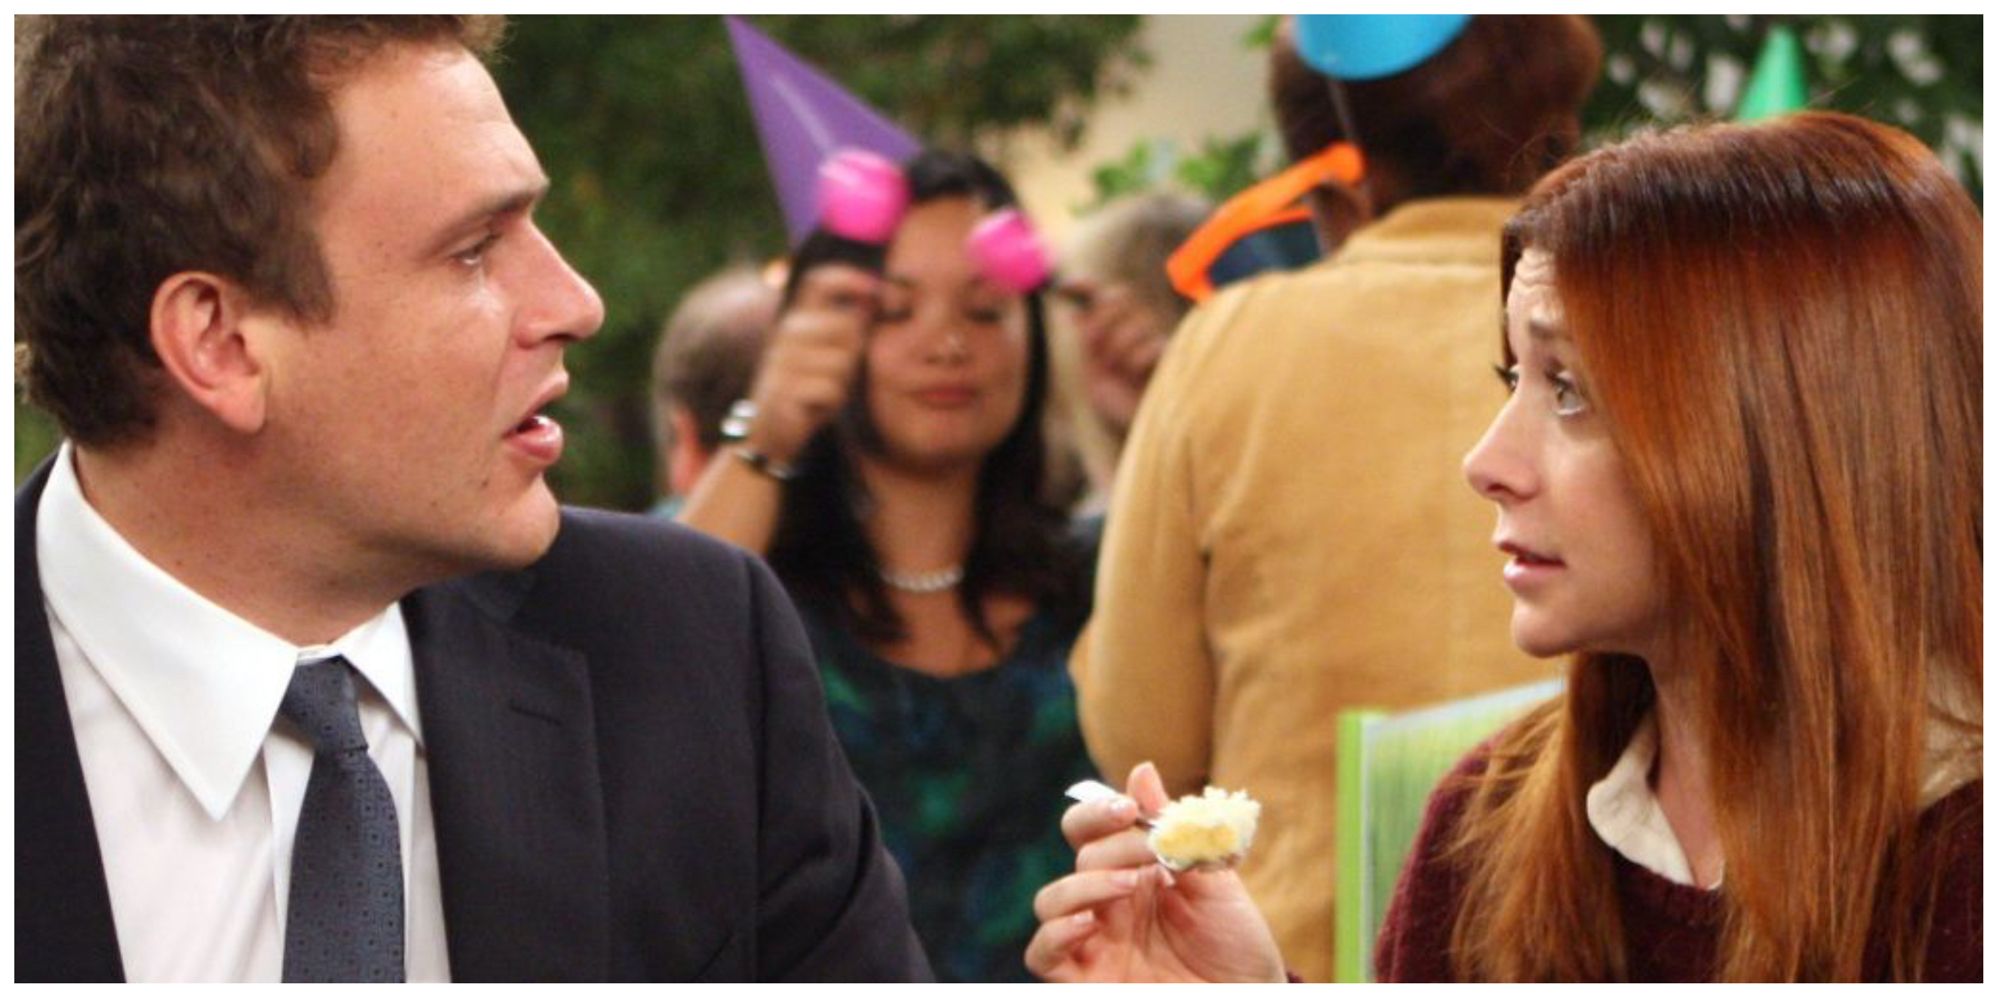 Lily feeding Marshall cake in How I Met Your Mother.